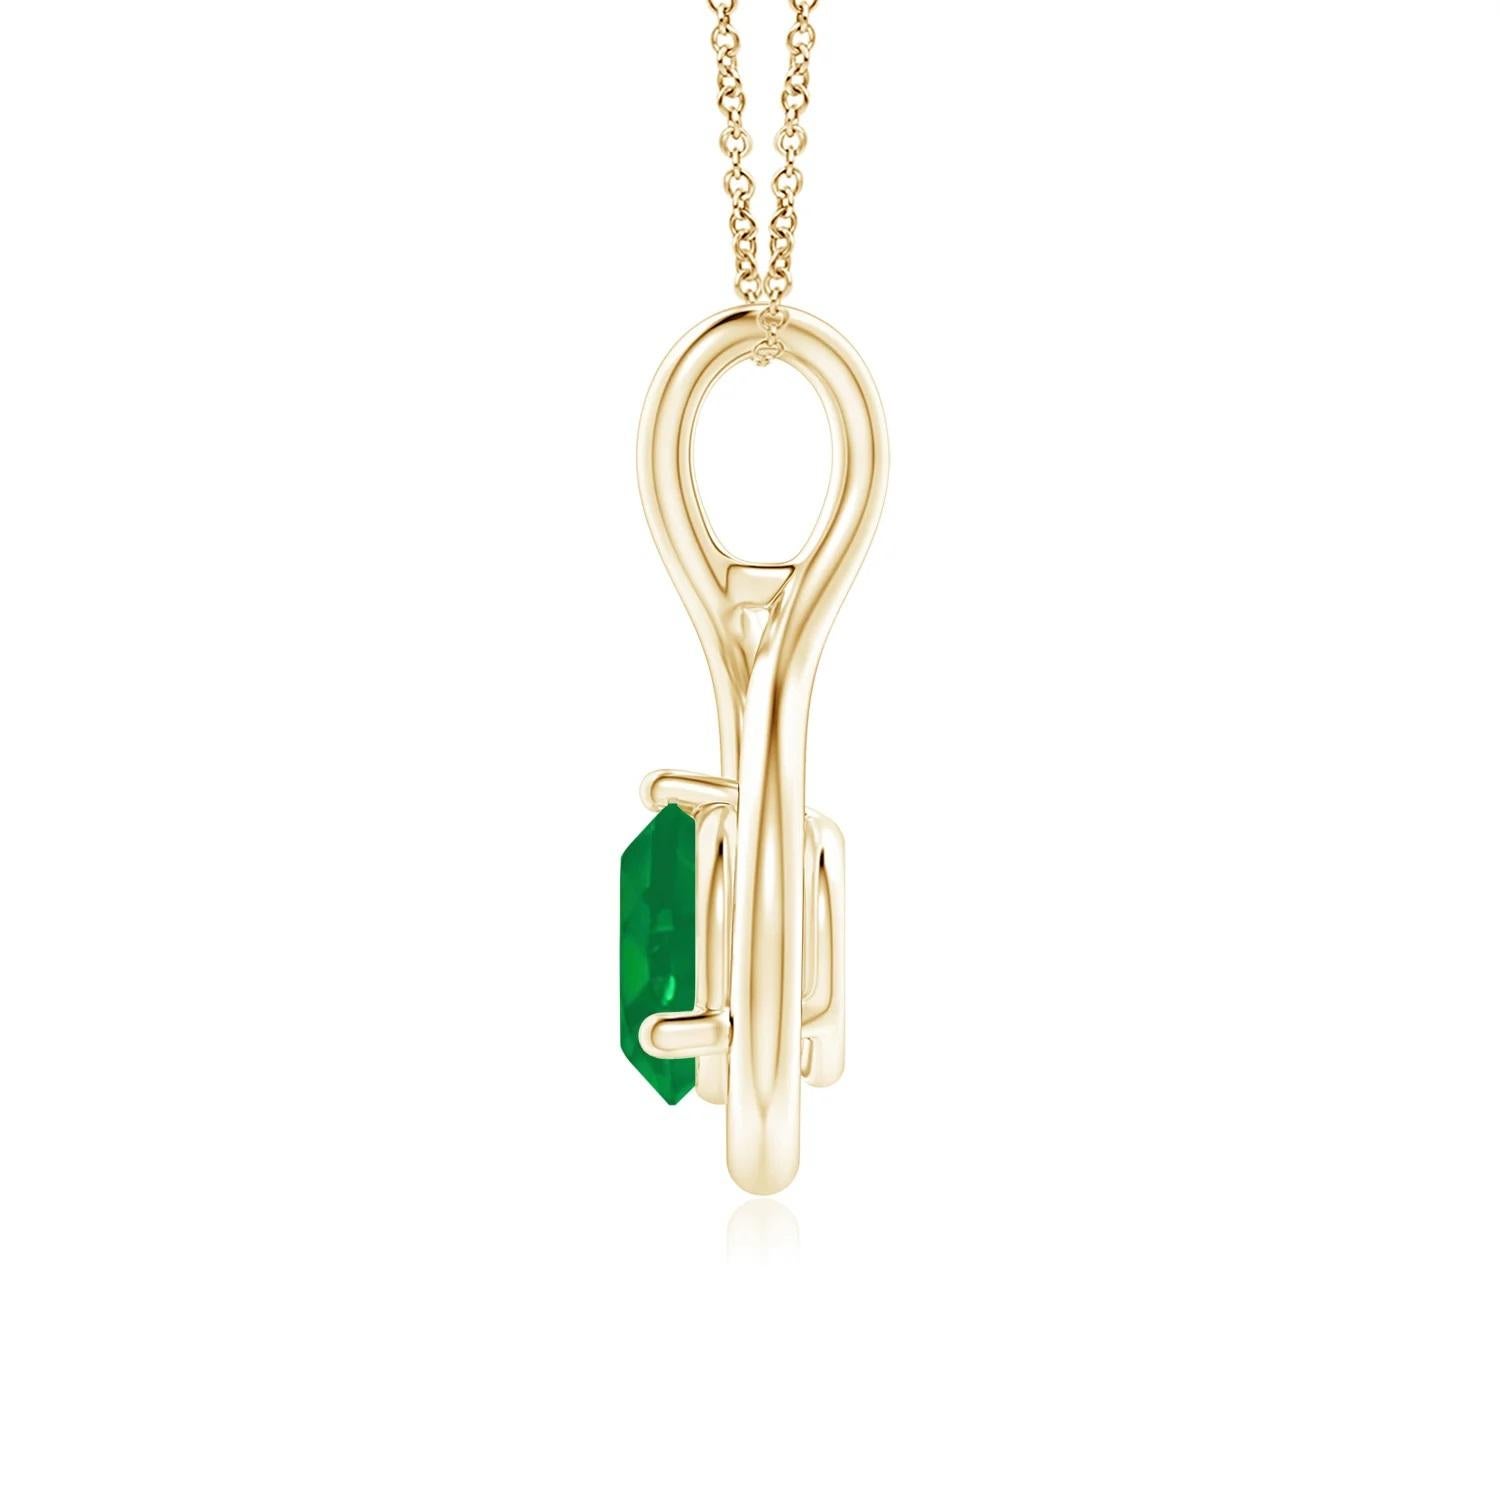 Nestled within a graceful infinity loop is a prong-set solitaire emerald that draws the eye with its lush green hue. The fluid elegance of this lustrous 14k yellow gold infinity twist pendant evokes a feminine vibe.
Emerald is the Birthstone for May